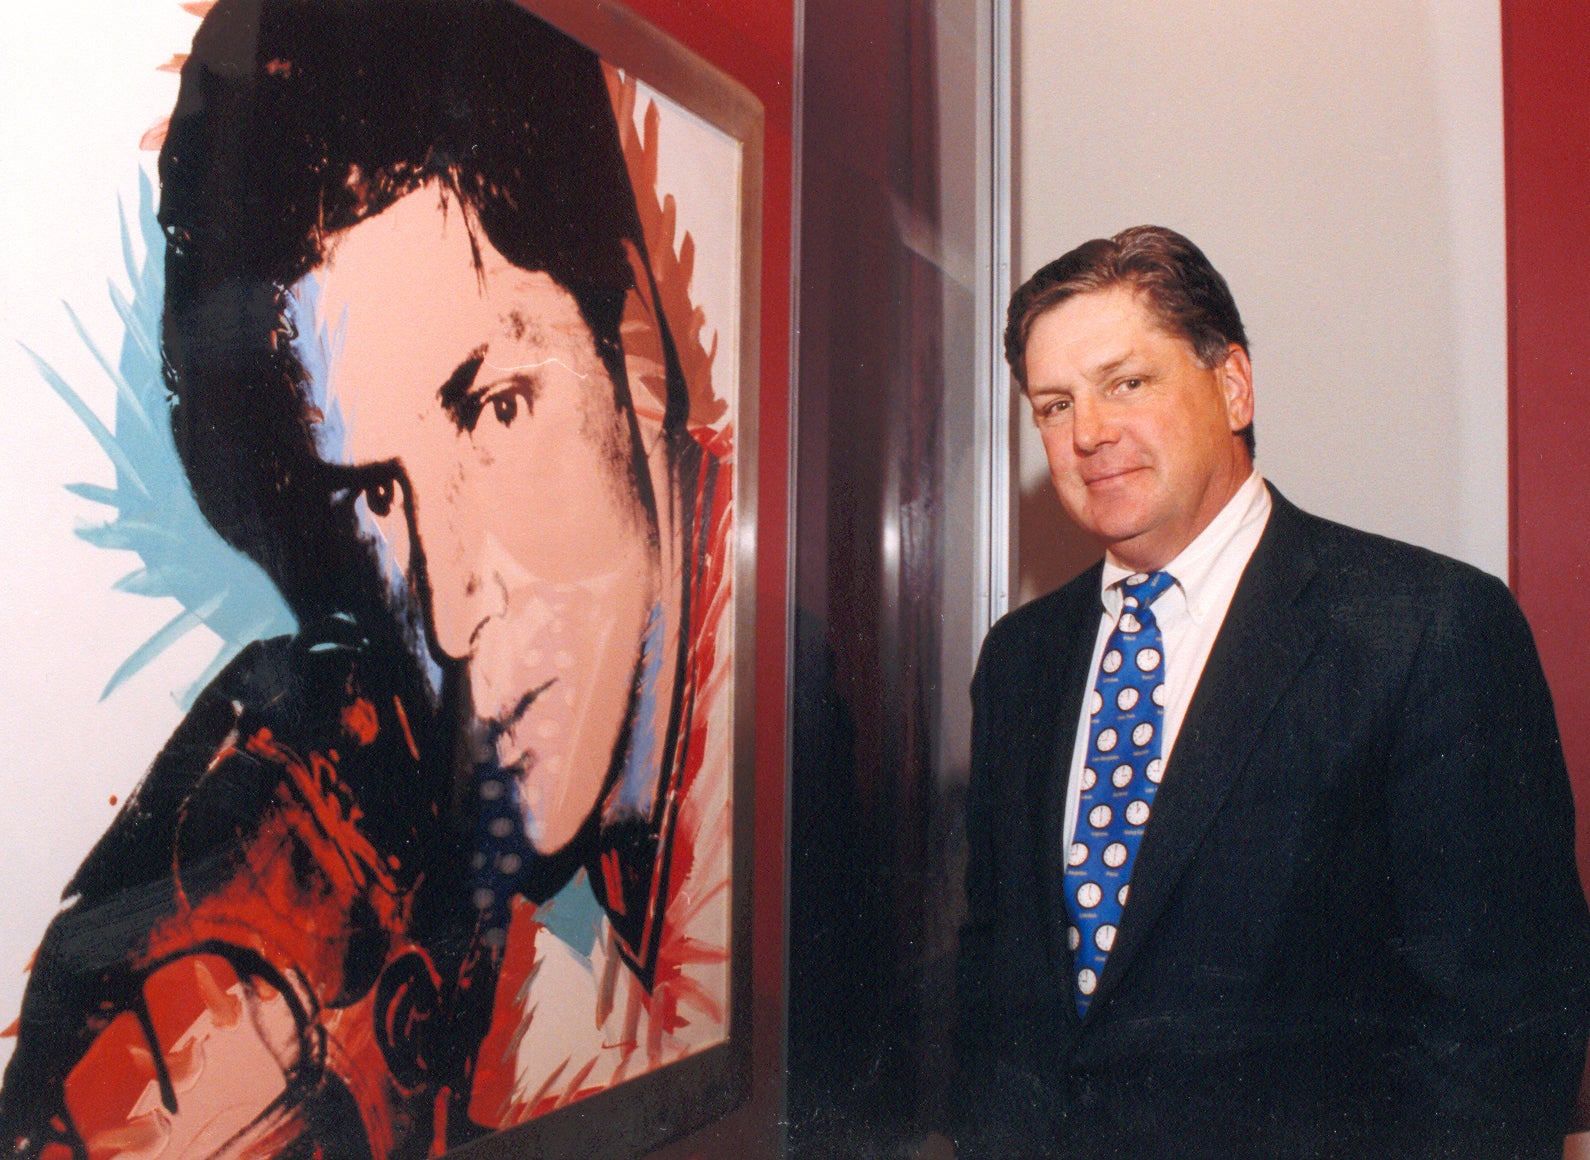 Tom Seaver remembered as one of baseball’s greatest pitchers